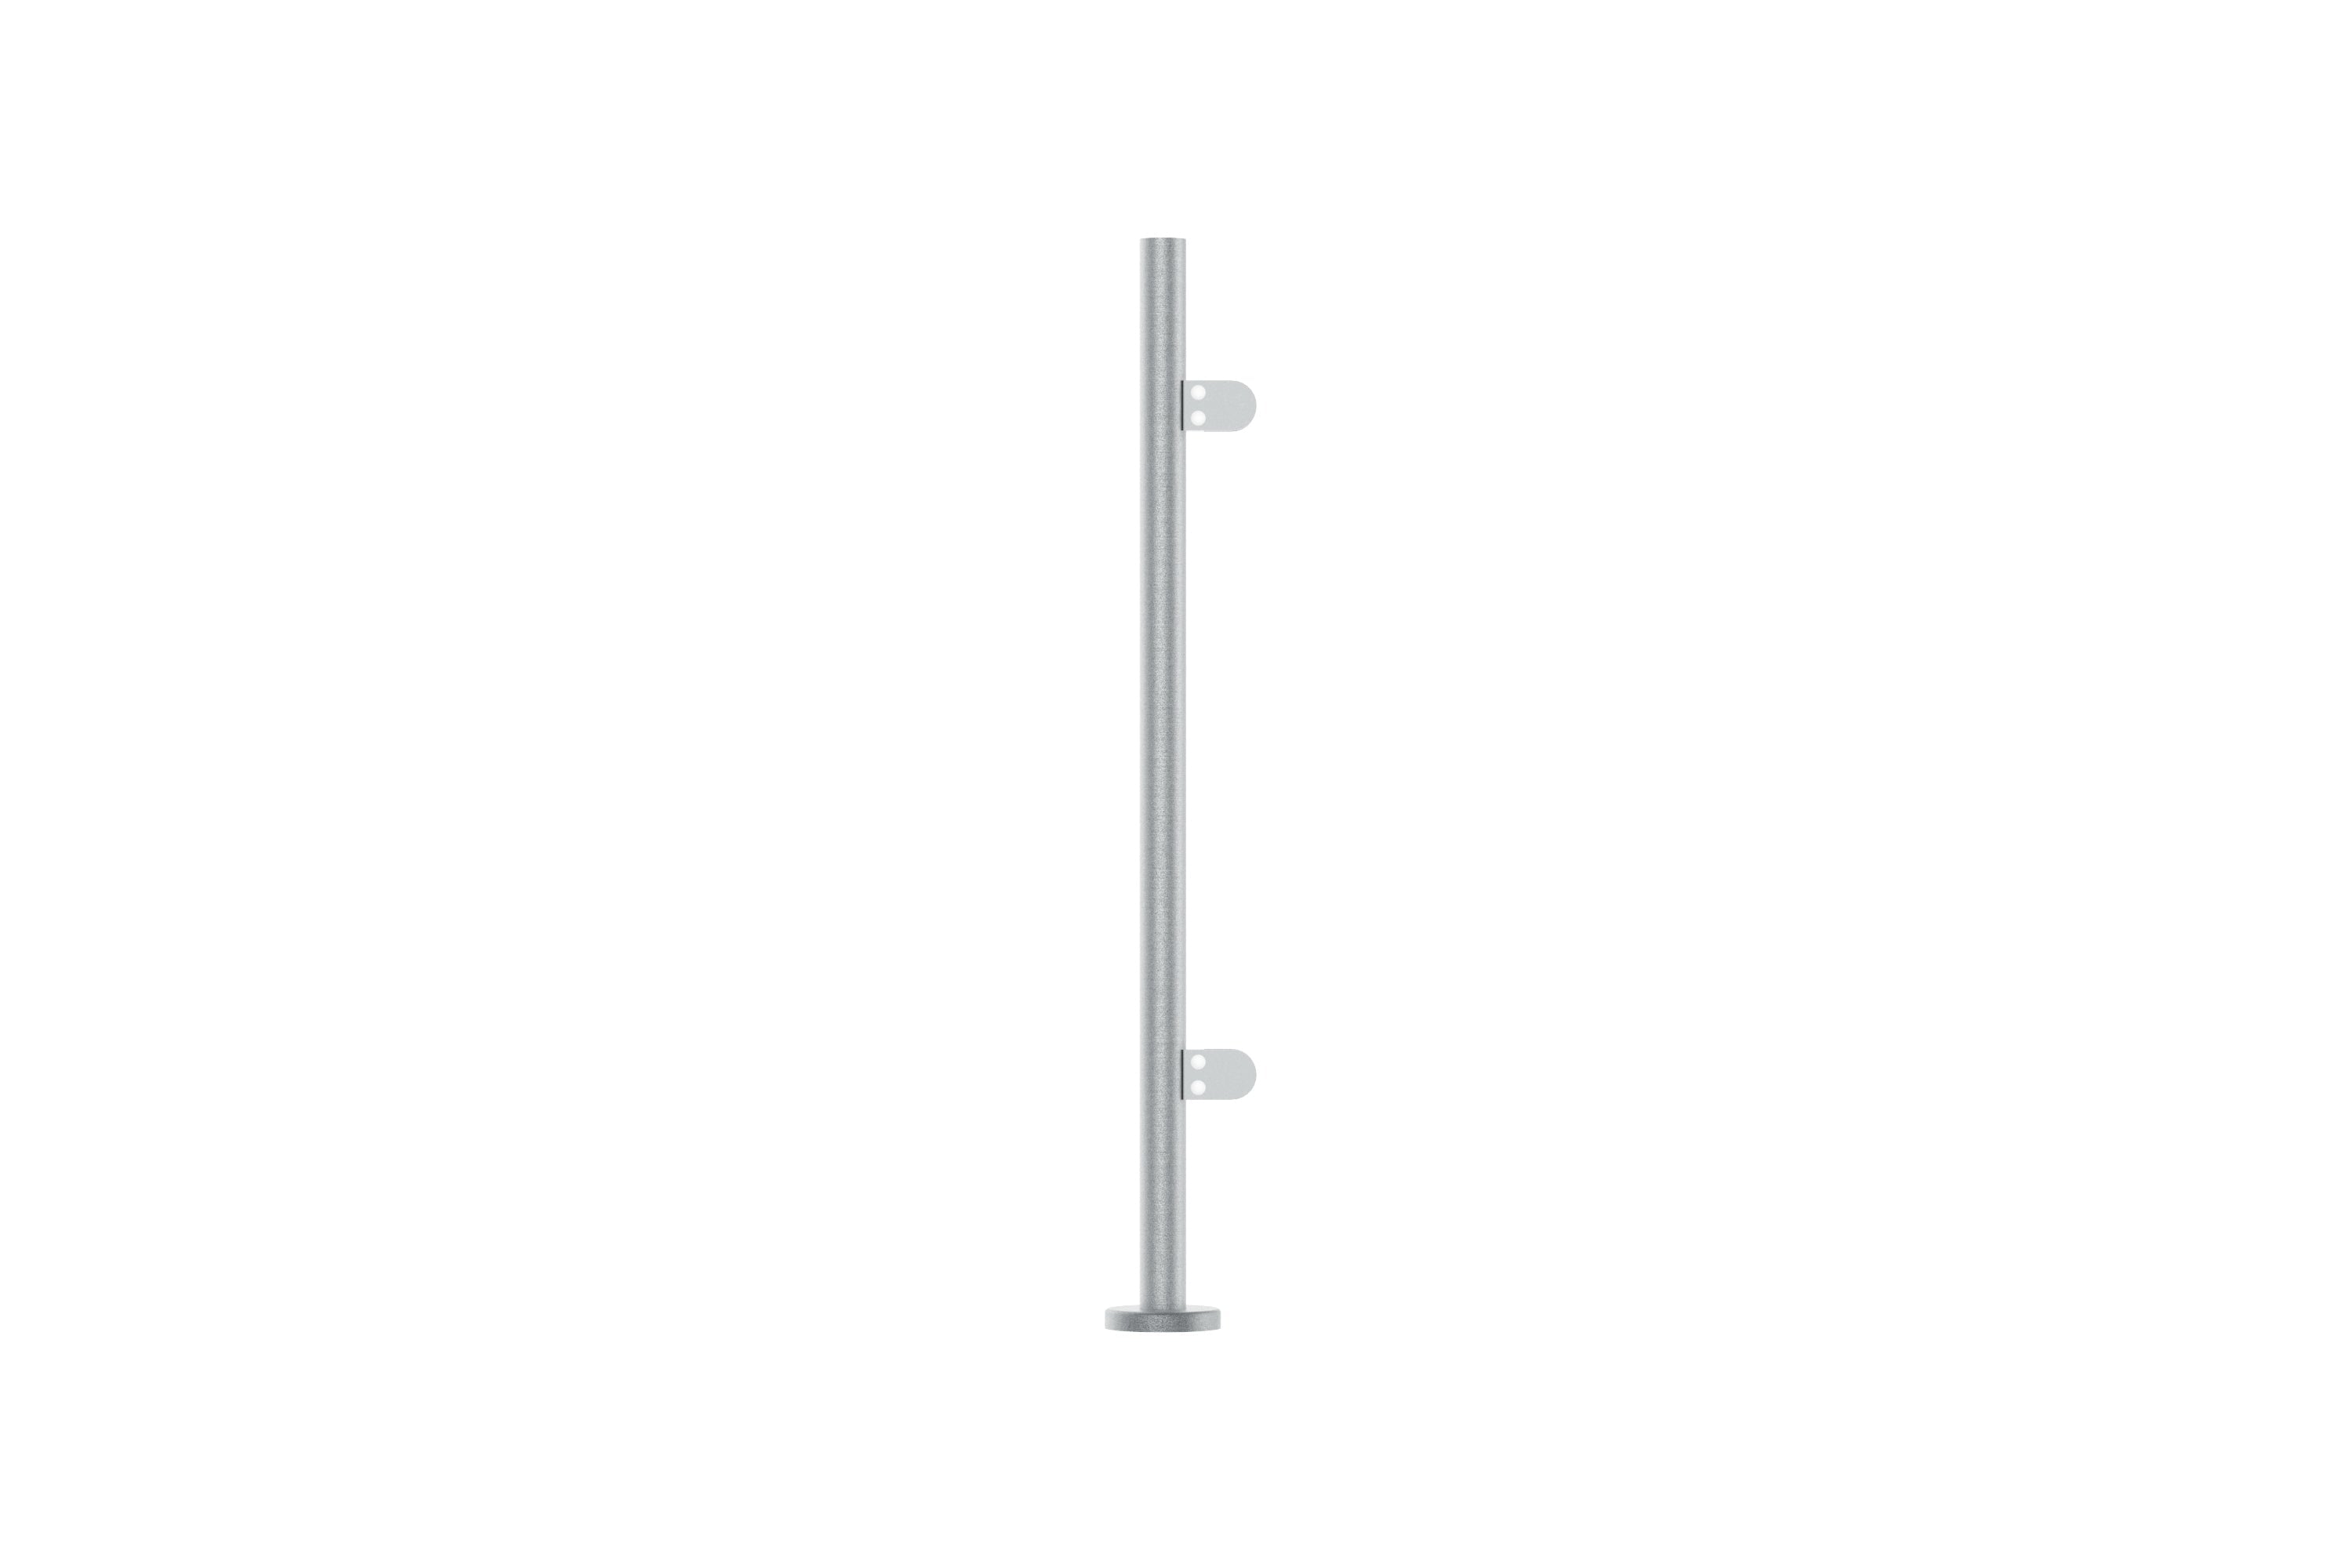 Glass Balustrade 42.4mm End Post Fully Assembled 978mm Long - Plain Top | Stainless 316